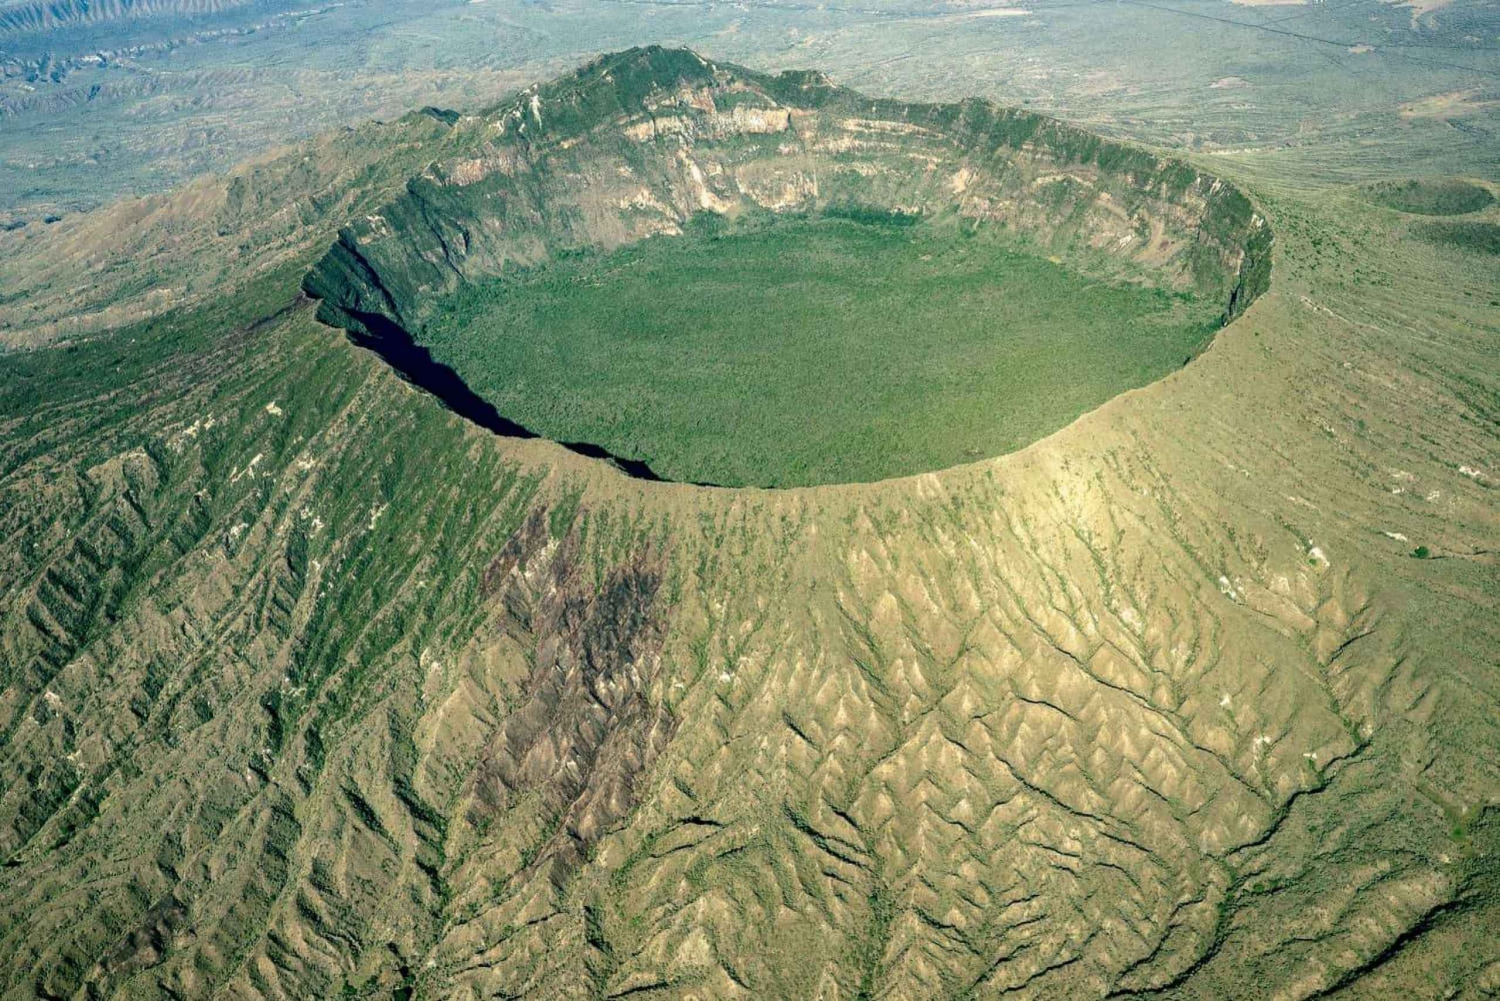 Day tour to Mount Longonot